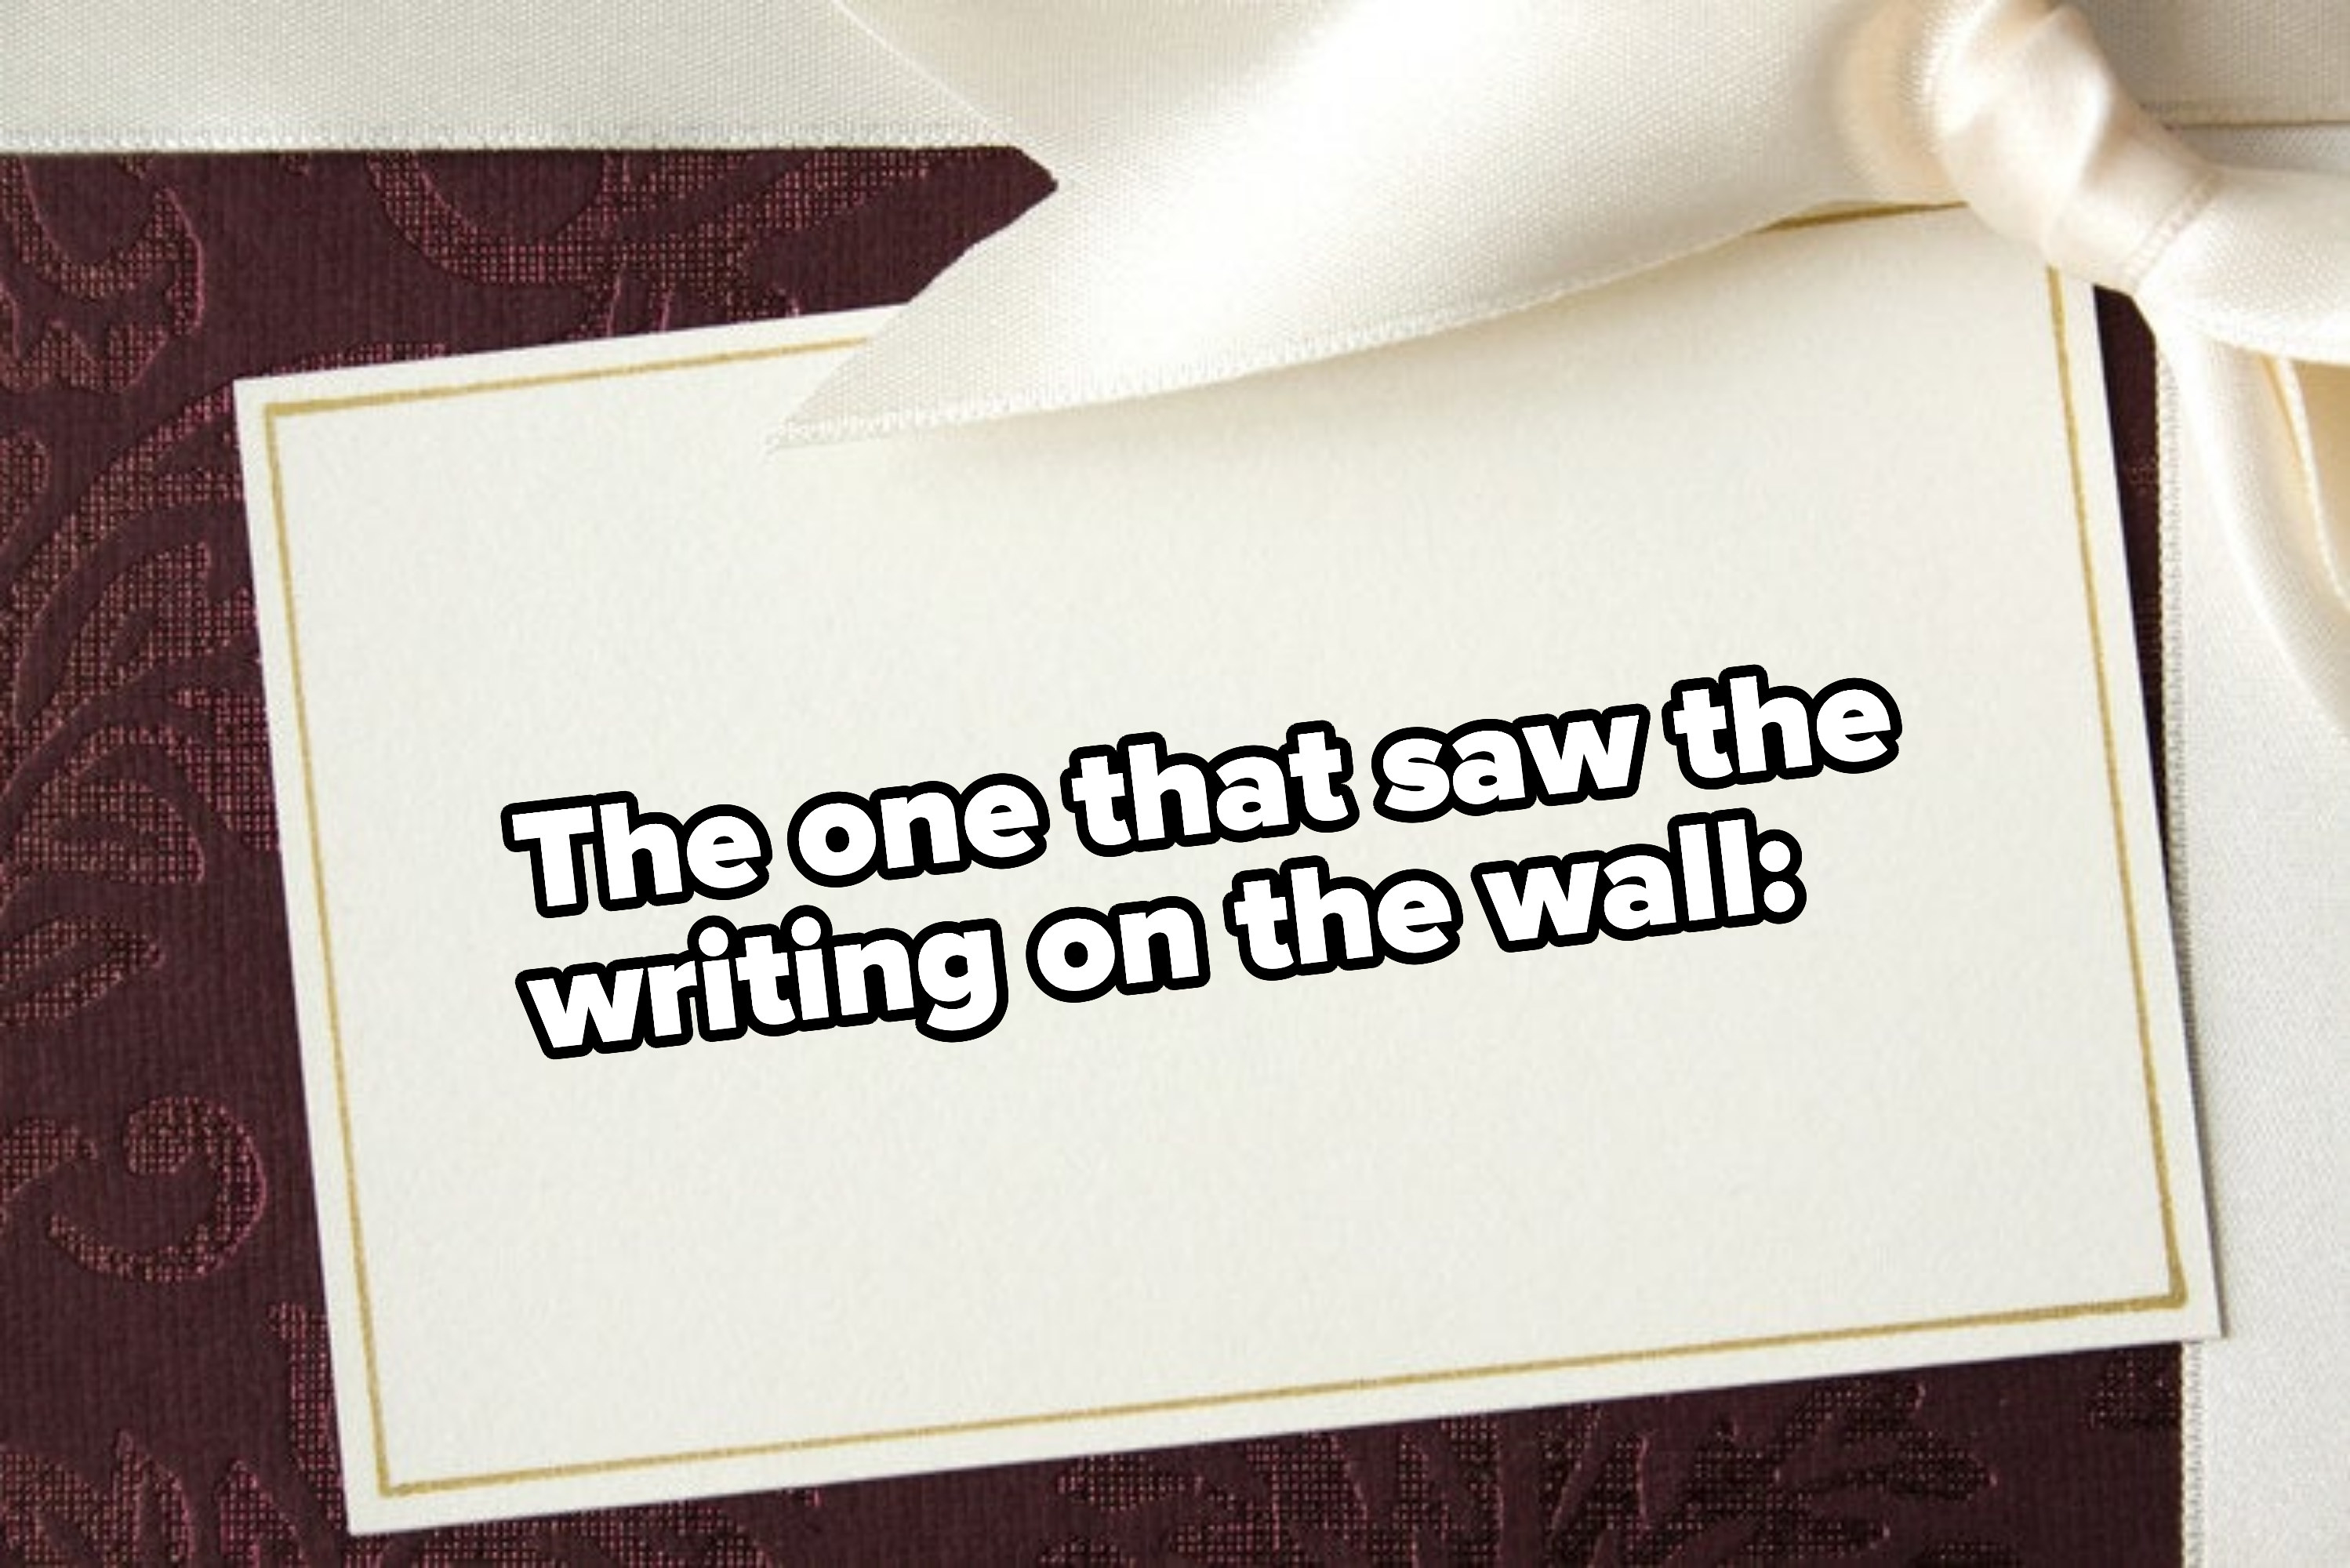 &quot;The one that saw the writing on the wall&quot;